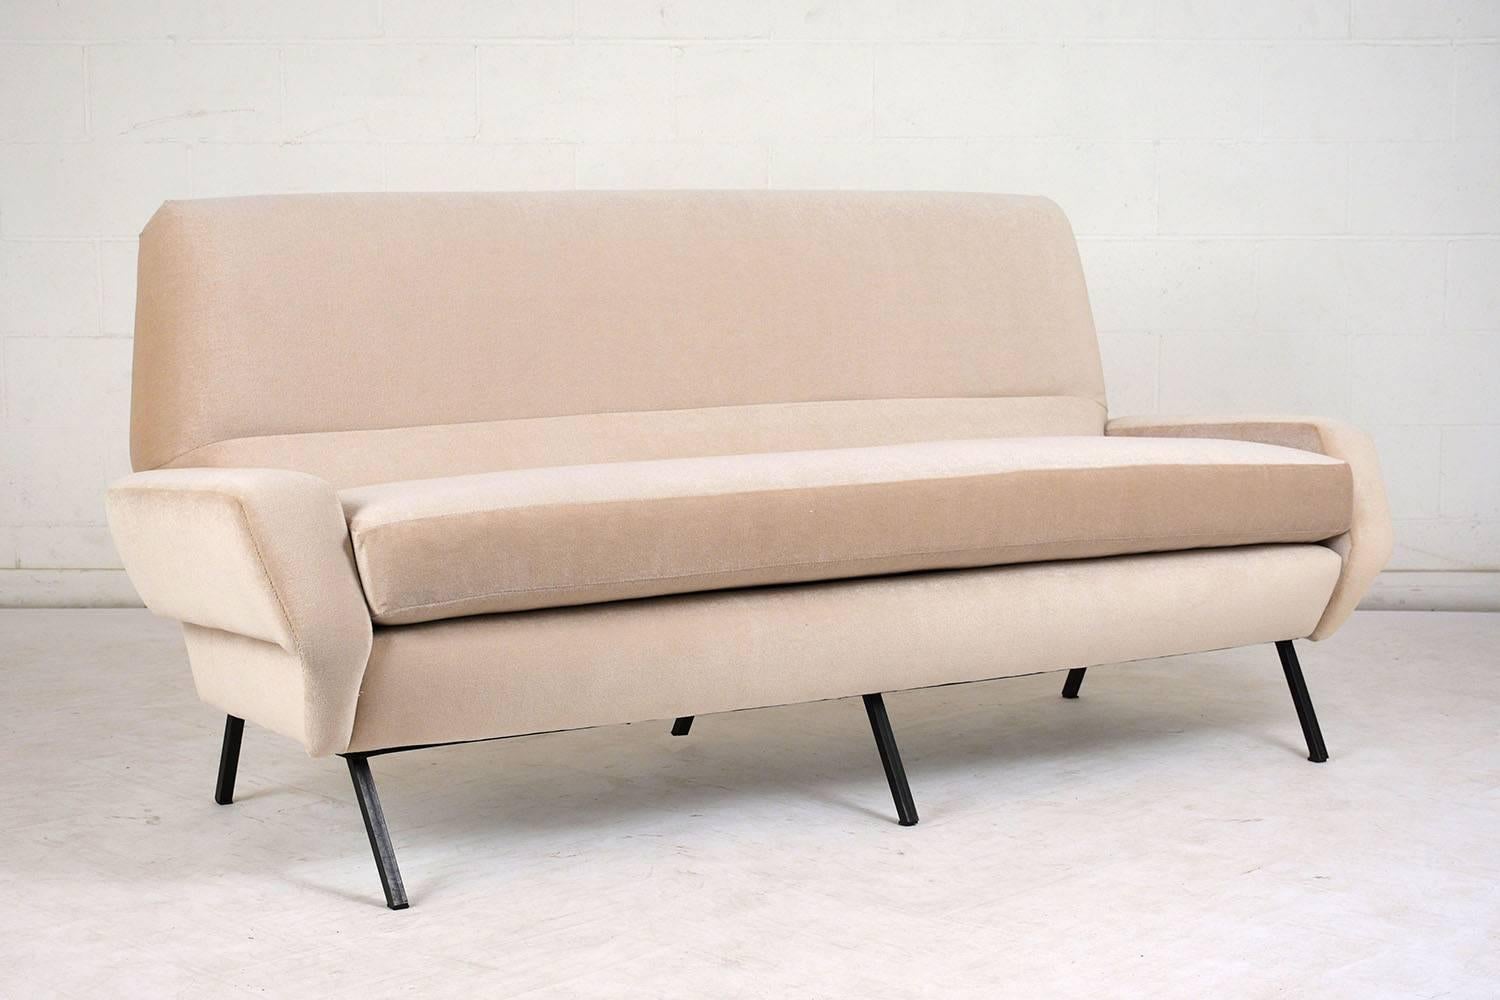 This 1960s Italian Mid-Century Modern style sofa has been completely restored with new ivory colored mohair upholstery. The soft curves of the sofa are accented by stitching accents and black iron legs. The seat features a very comfortable cushion.